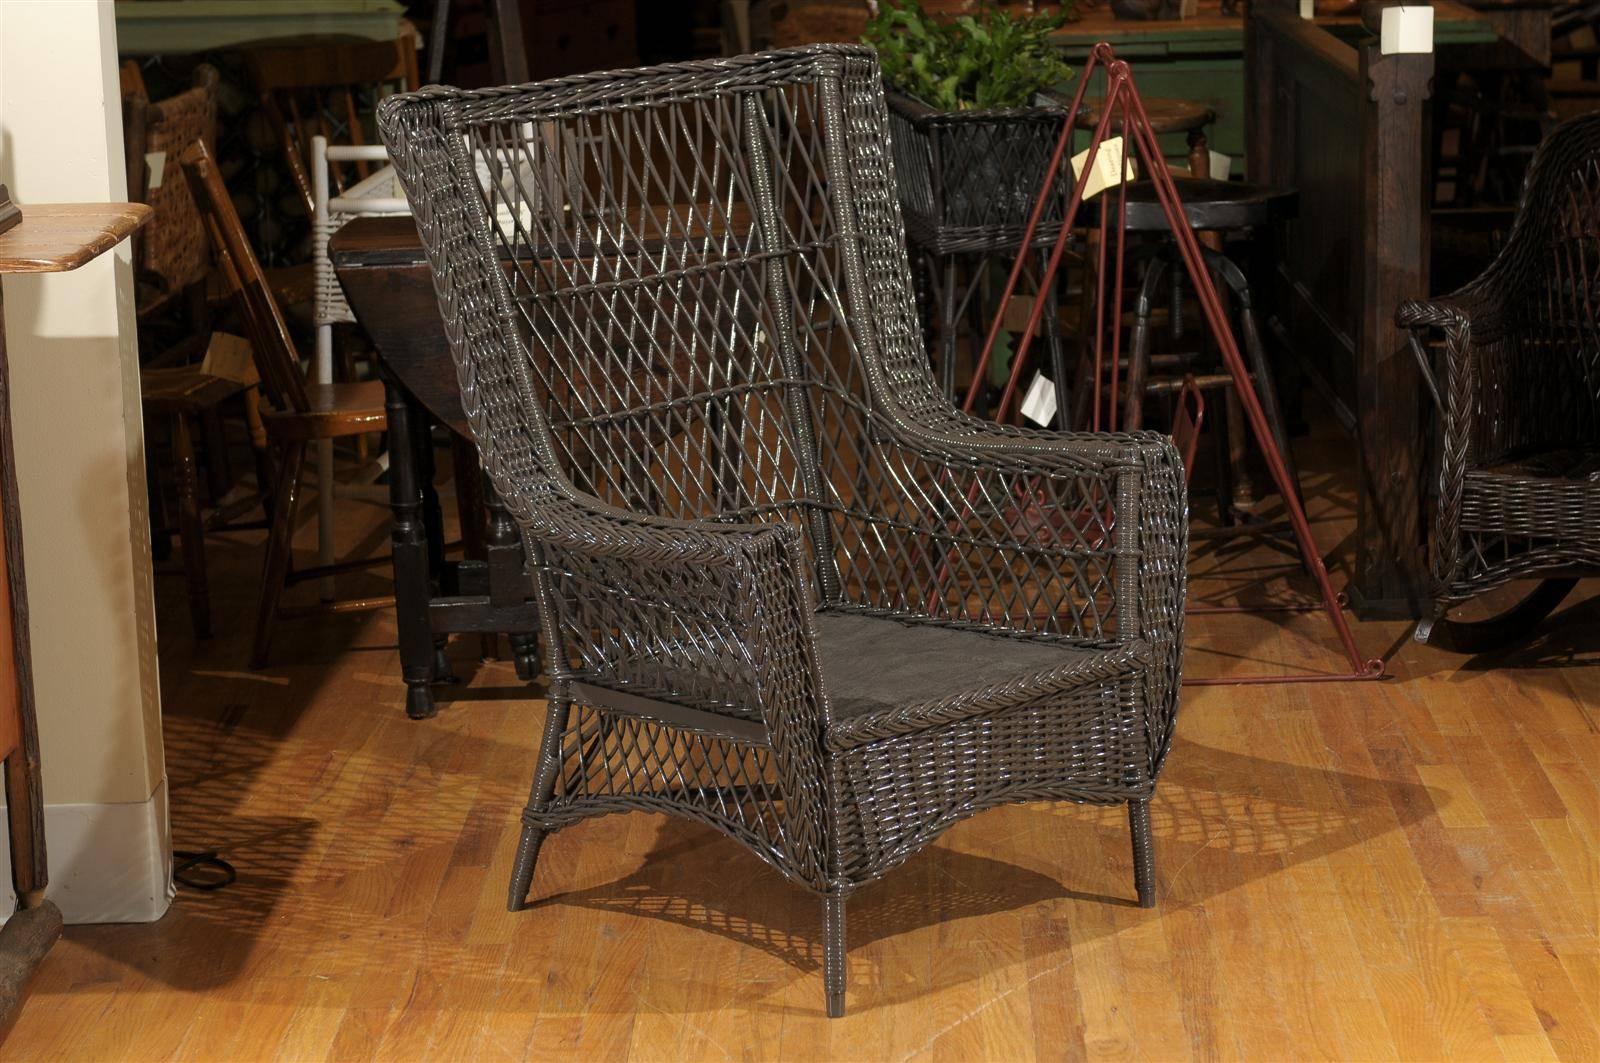 This Classic Bar Harbor chair is painted obsidian brown. The chair was made in the 1920s.

 